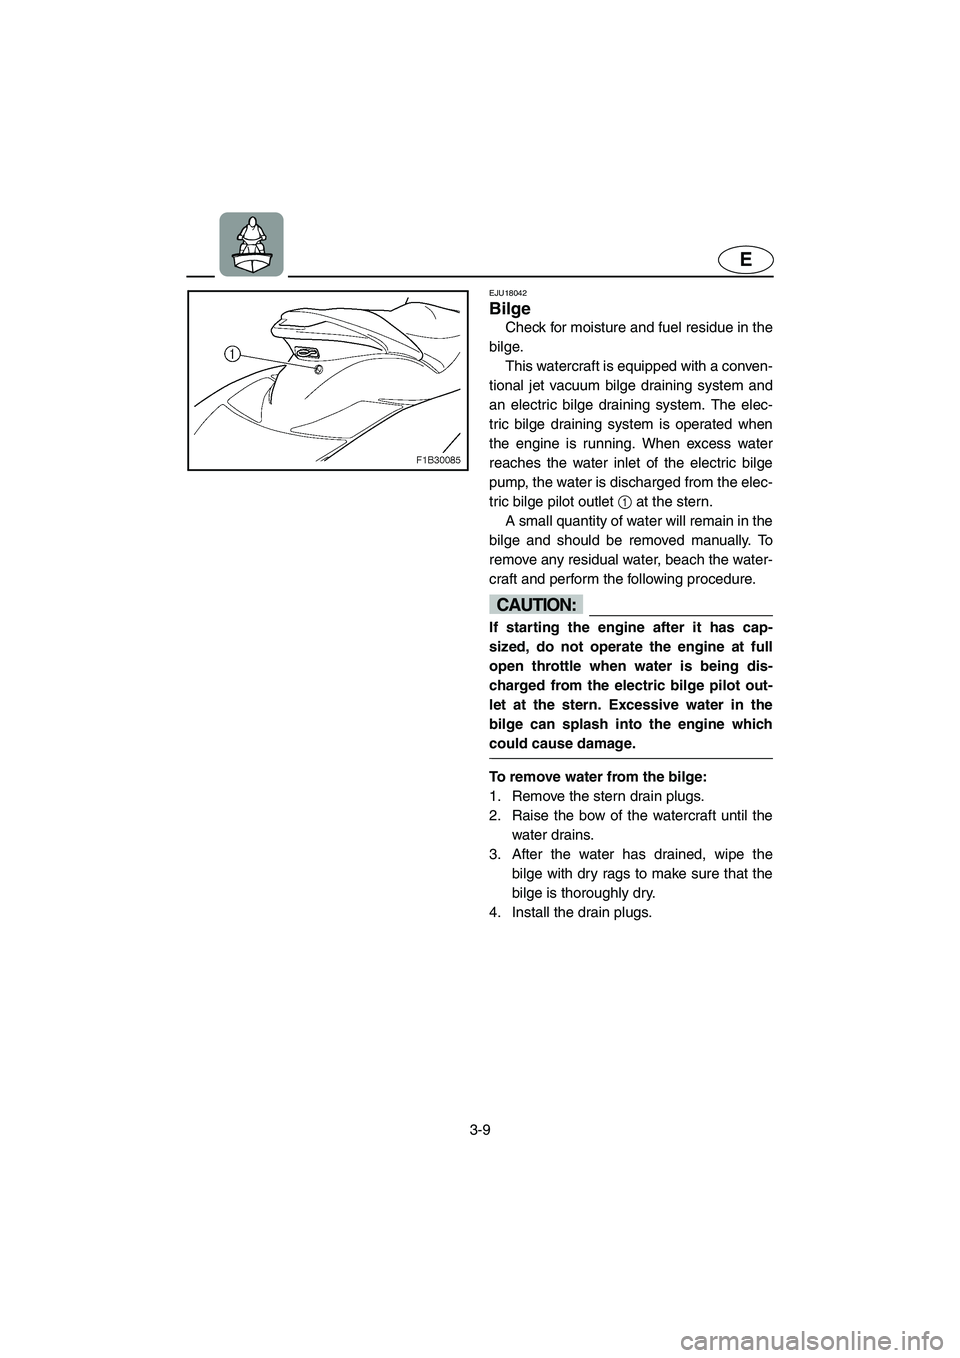 YAMAHA FX CRUISER 2006 Repair Manual 3-9
E
EJU18042 
Bilge 
Check for moisture and fuel residue in the
bilge.
This watercraft is equipped with a conven-
tional jet vacuum bilge draining system and
an electric bilge draining system. The e